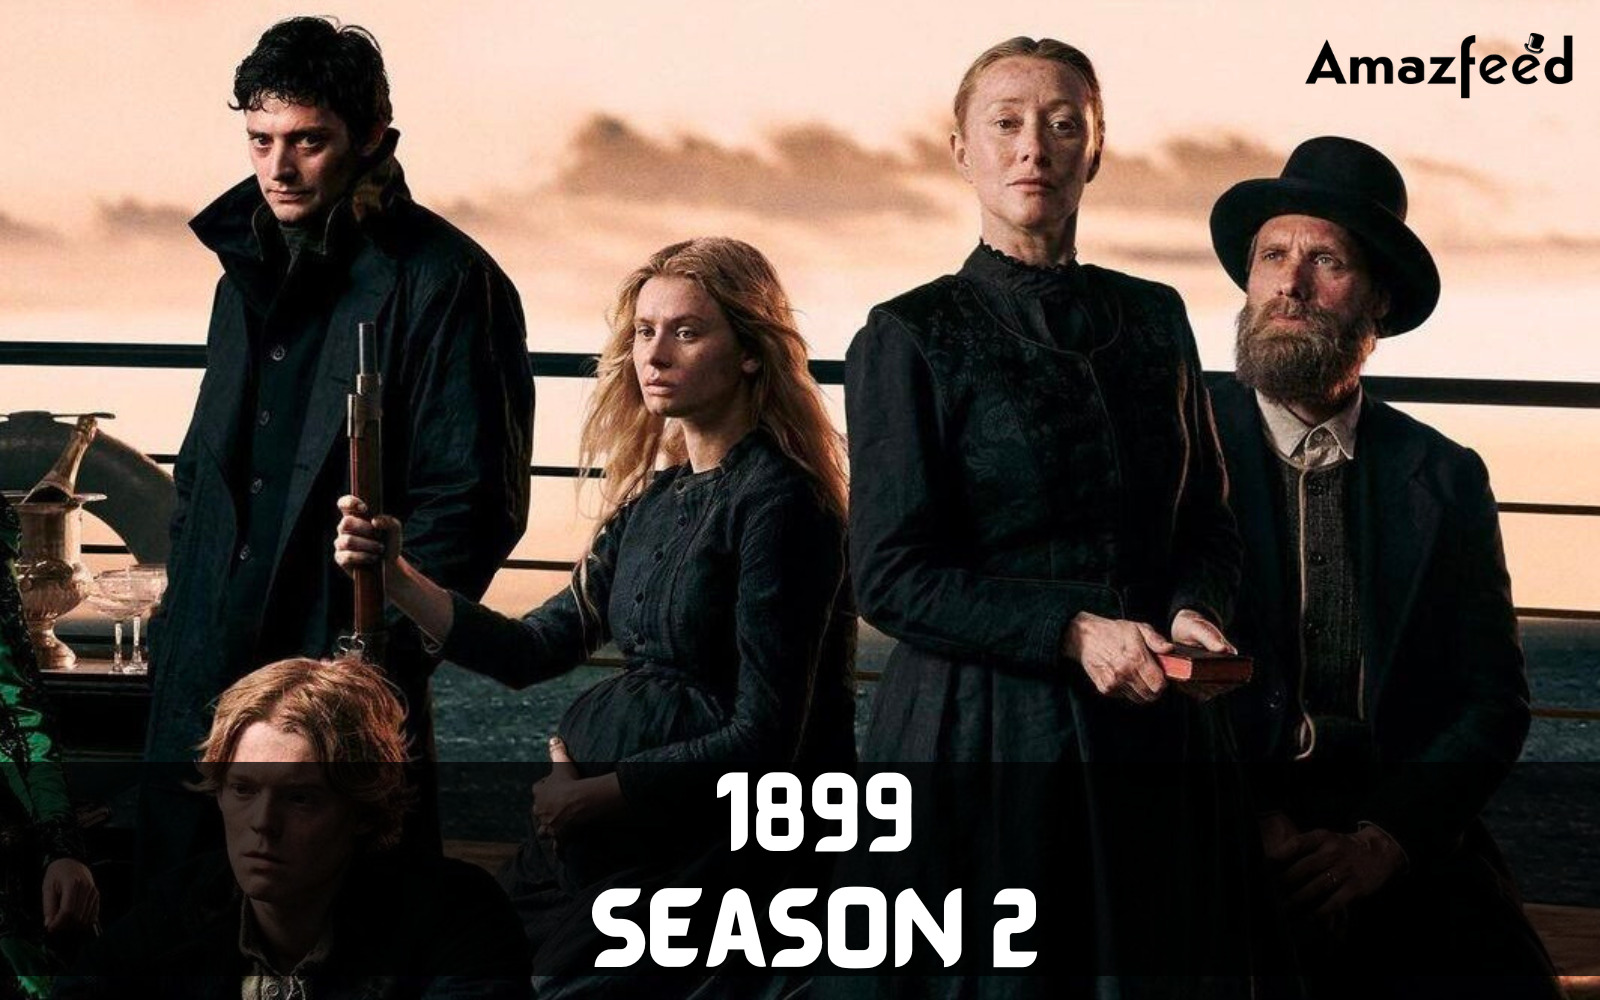 Is There Any Trailer For 1899 Season 2